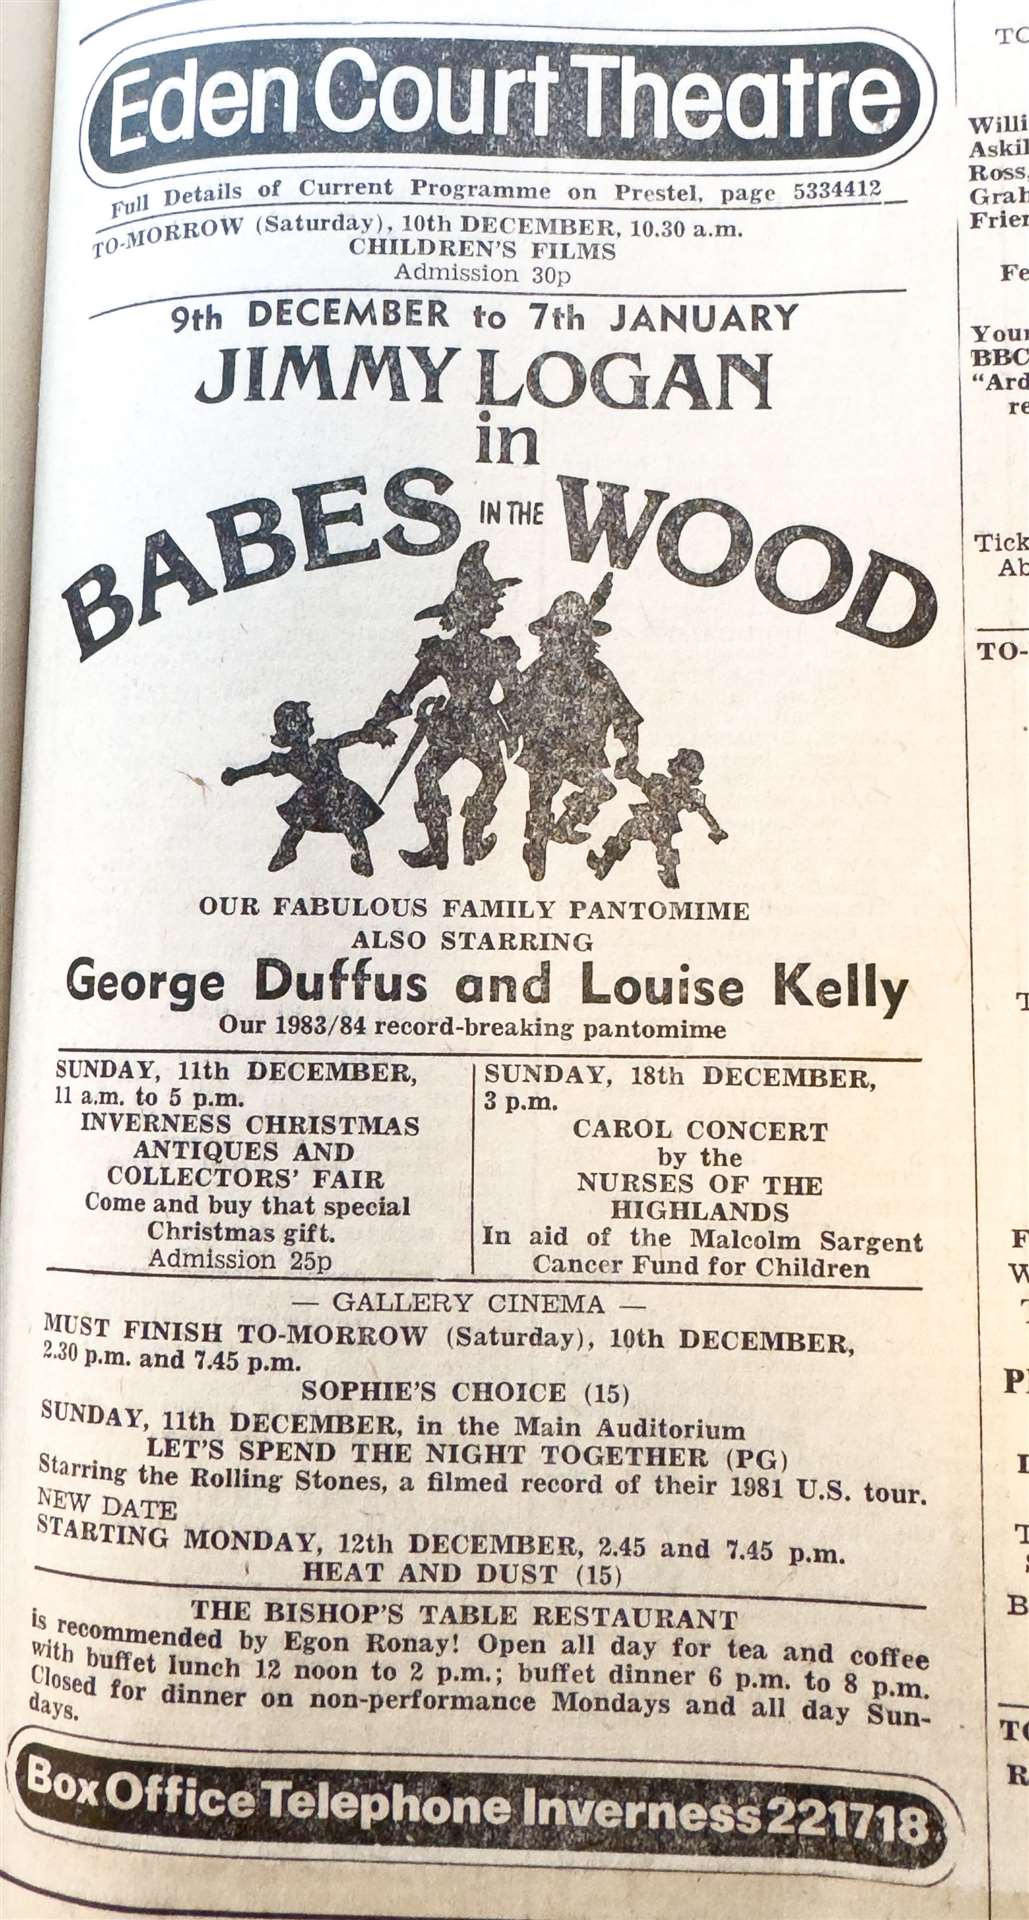 The legendary Jimmy Logan starred in Babes In The Wood at Eden Court Theatre.